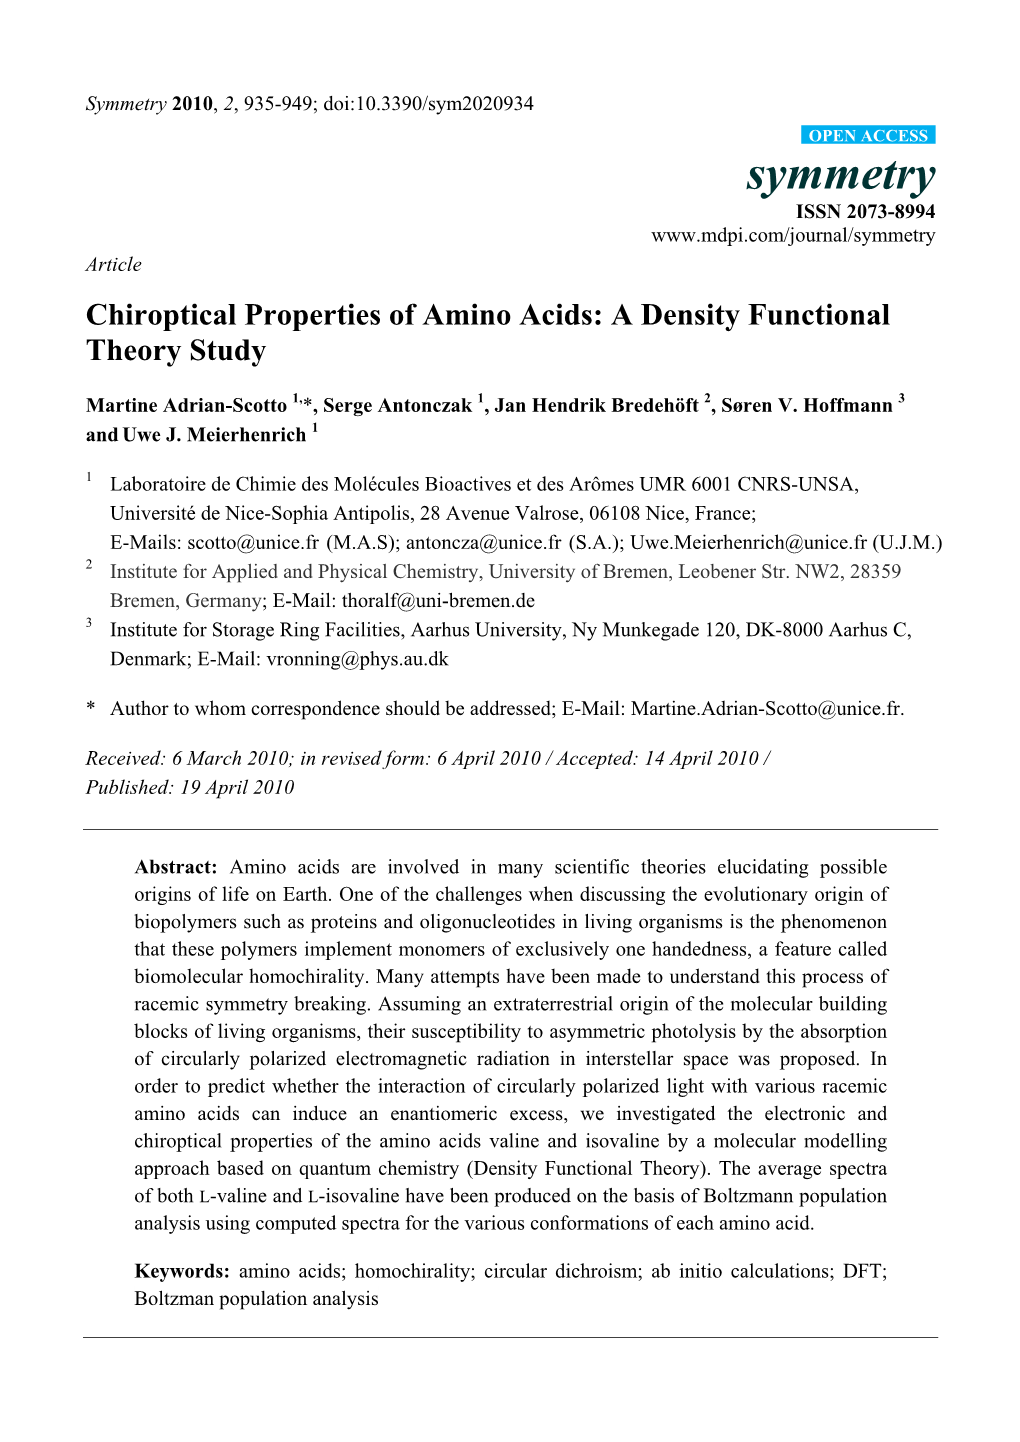 Chiroptical Properties of Amino Acids: a Density Functional Theory Study